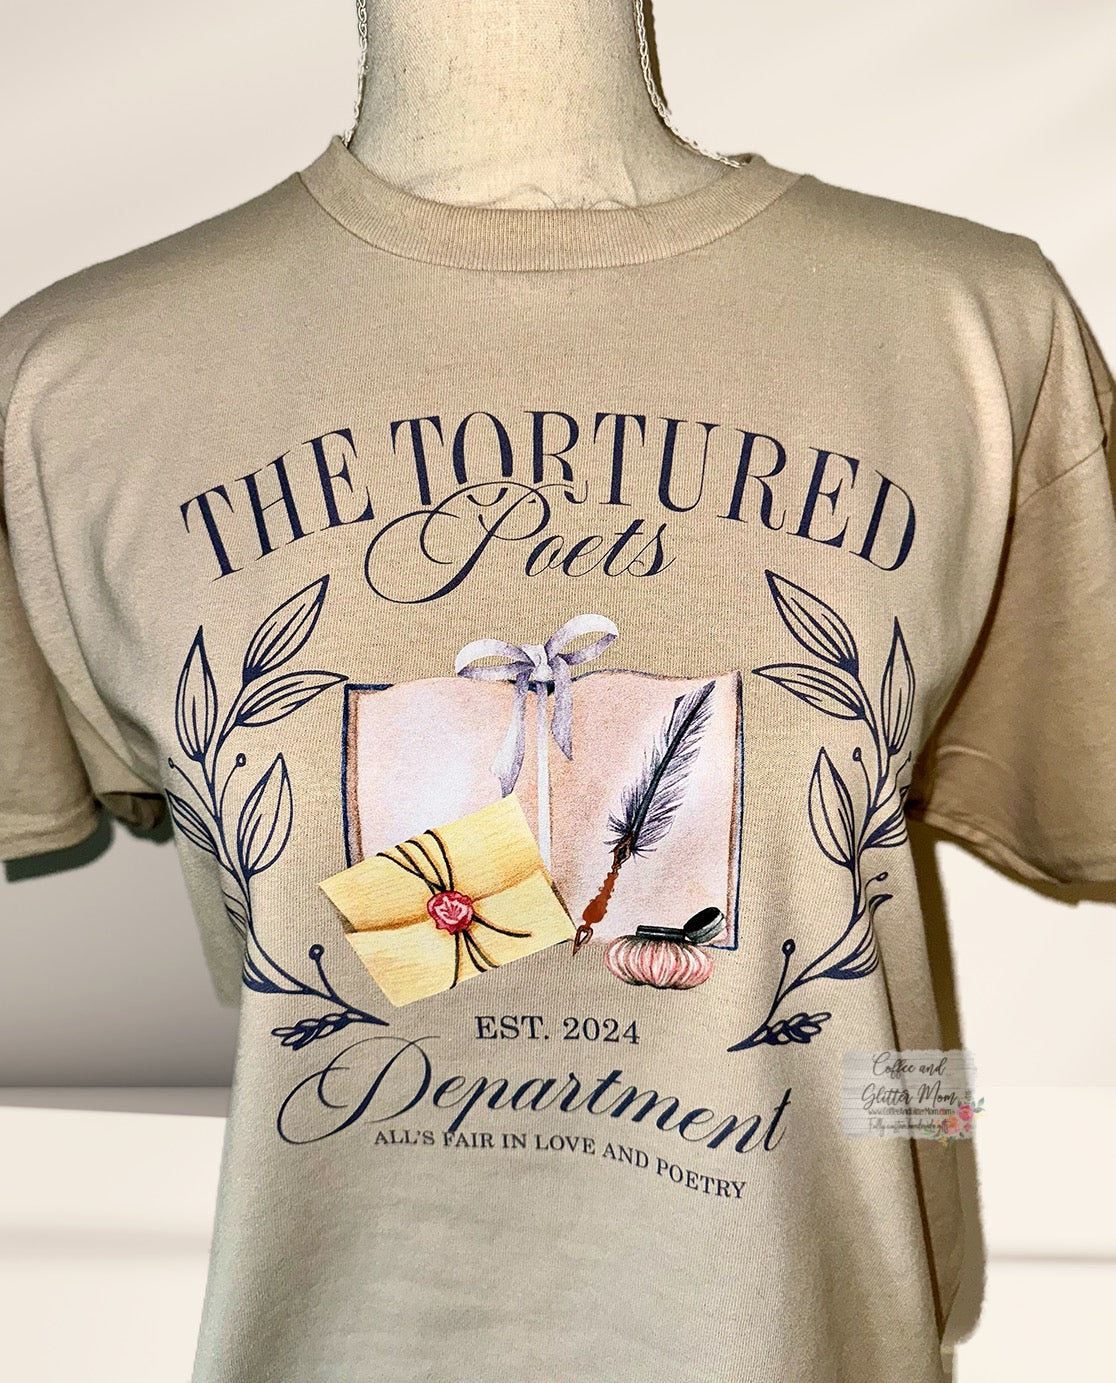 In-Stock Tortured Poets Youth Tee